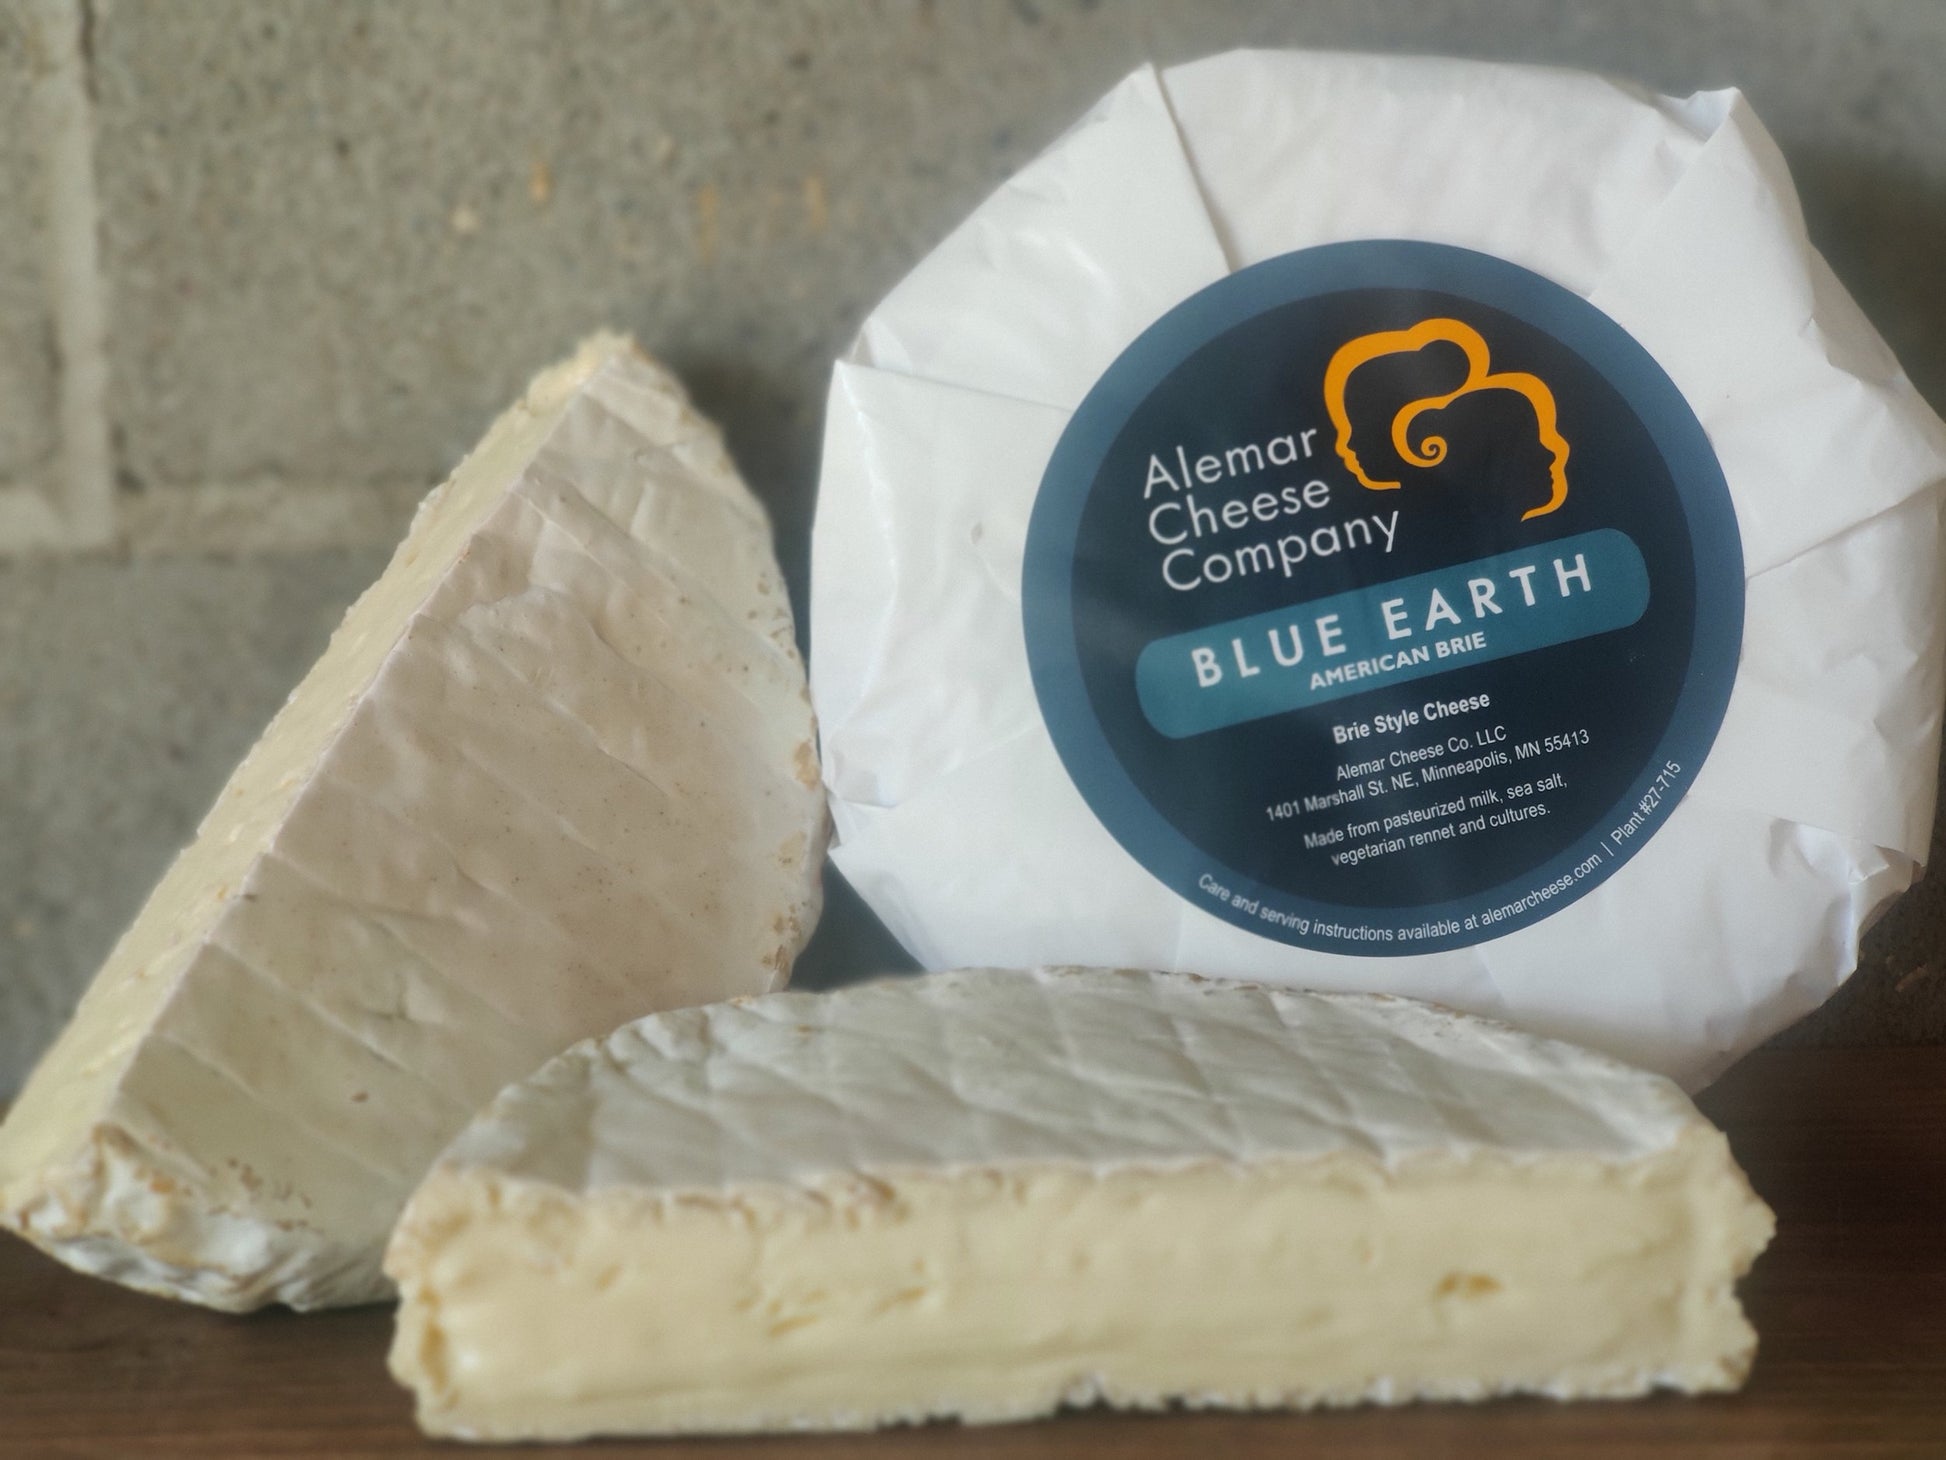 Package of Blue Earth cheese from Alemar Cheese Company